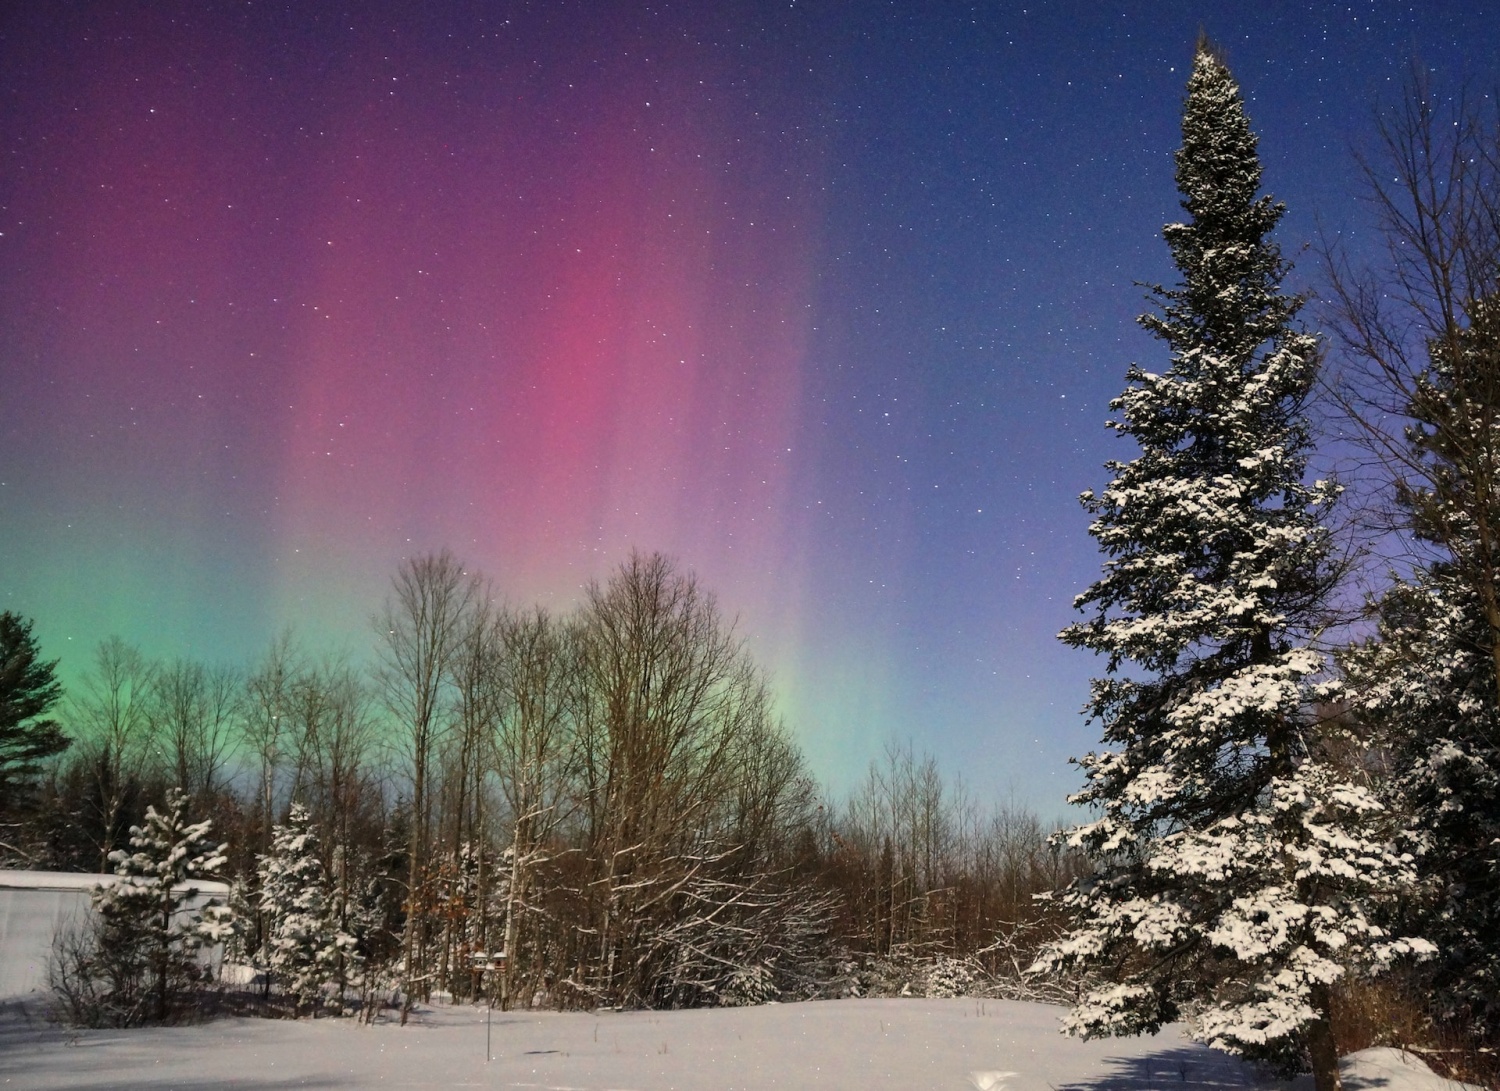 Northern Lights Dazzle Midwest Northeast Us Skies Following Recent G3 Geomagnetic Storm.jpg